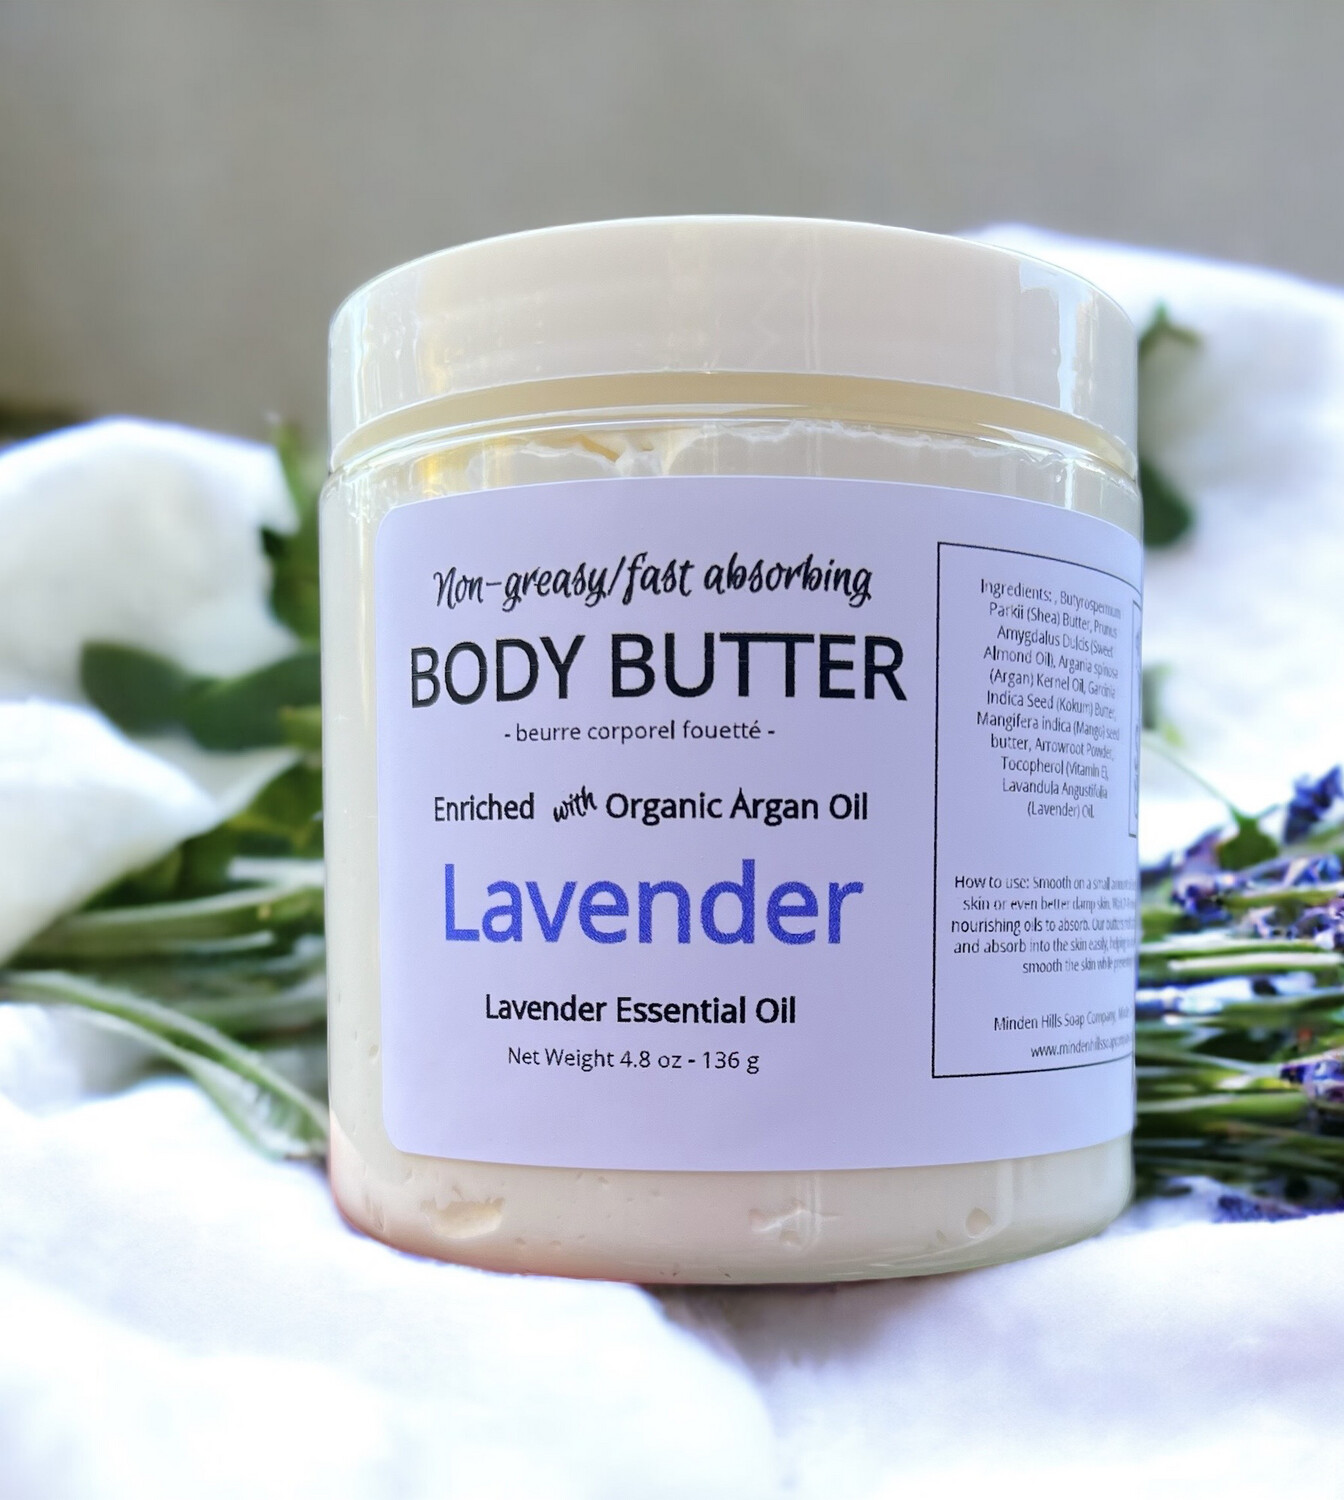 Body Butter Enriched with Organic Argan Oil